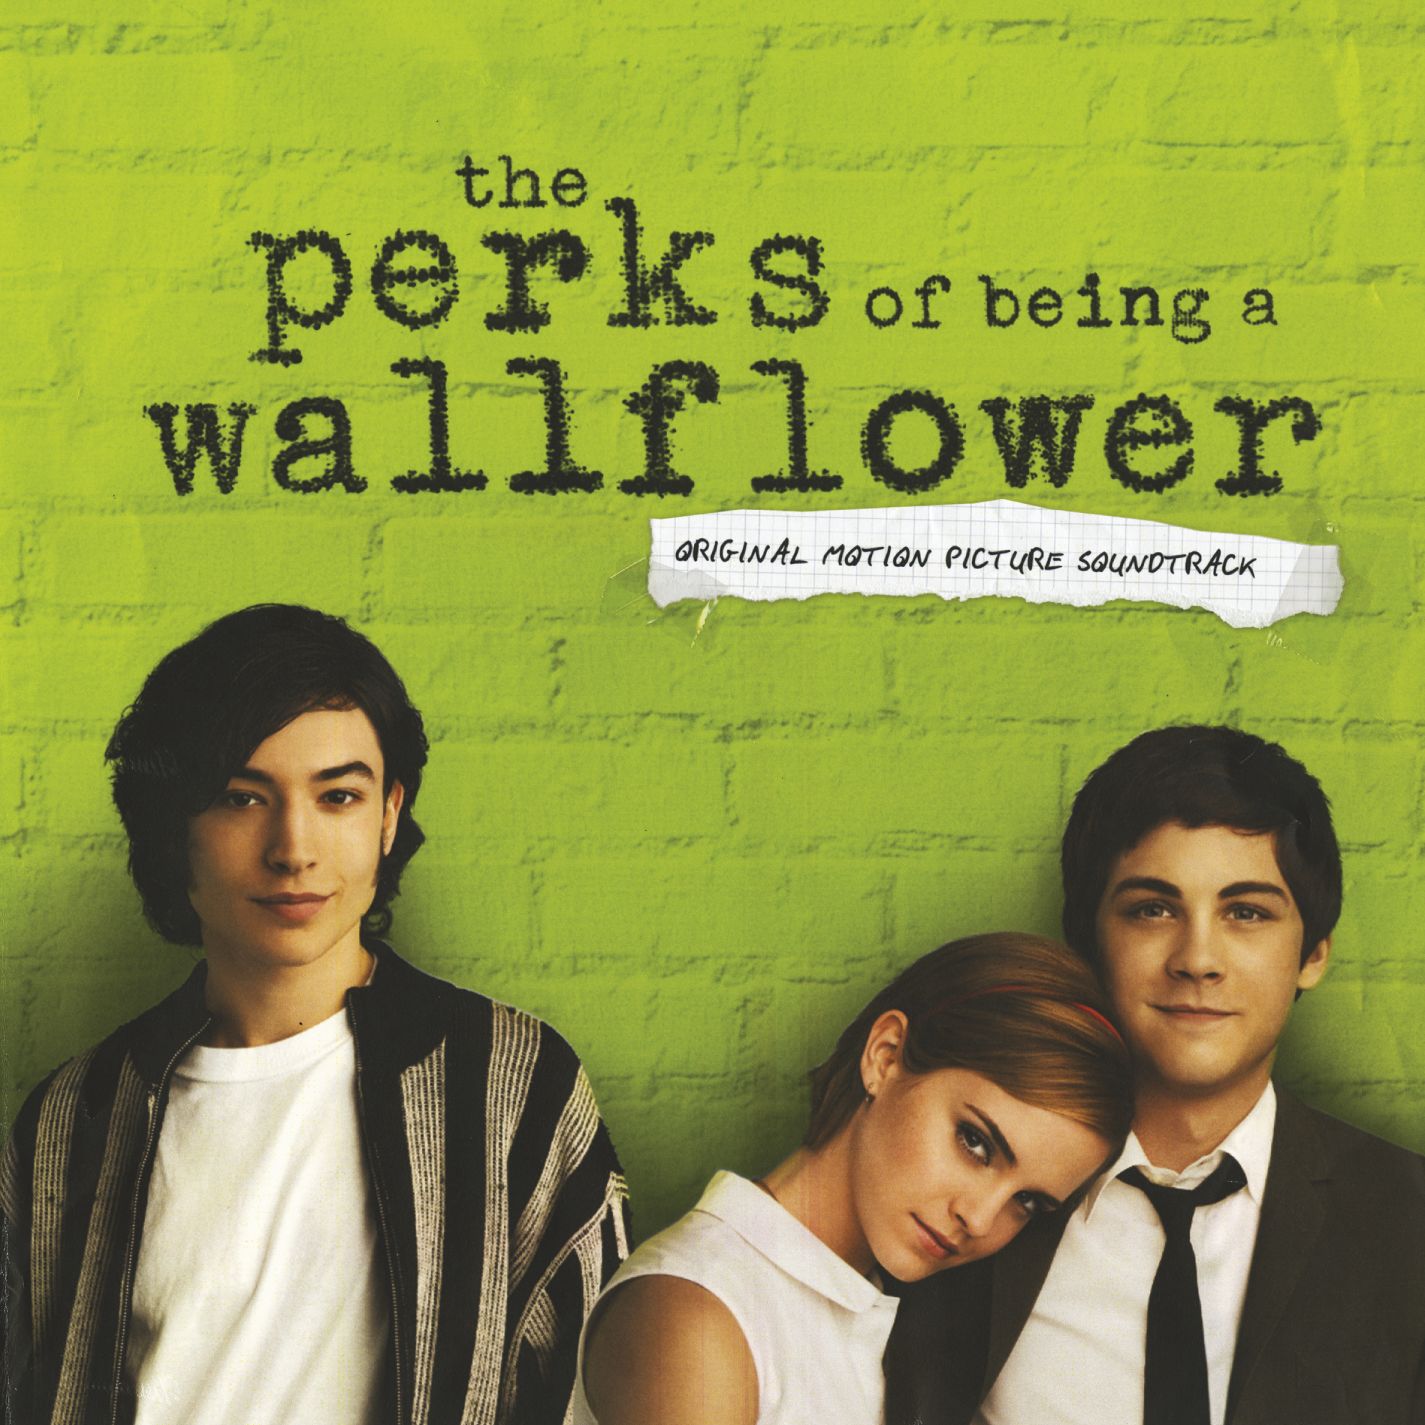 The Perks Of Being A Wallflower (Original Motion Picture Soundtrack)